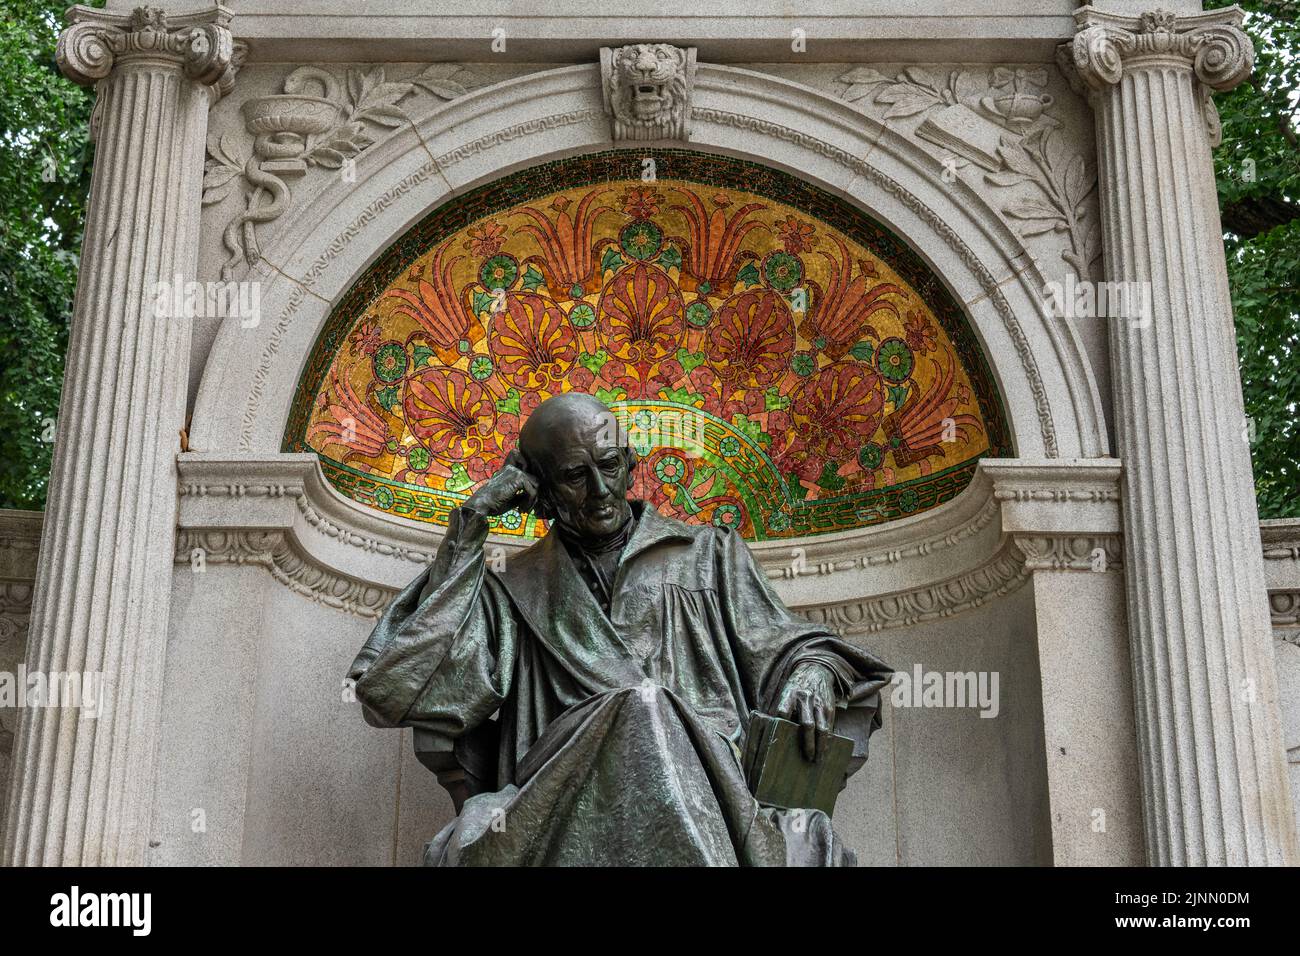 Washington, DC - June 27, 2022: Detail of memorial to Samuel Hahnemann who was a German physician known for creating the system of alternative medicin Stock Photo